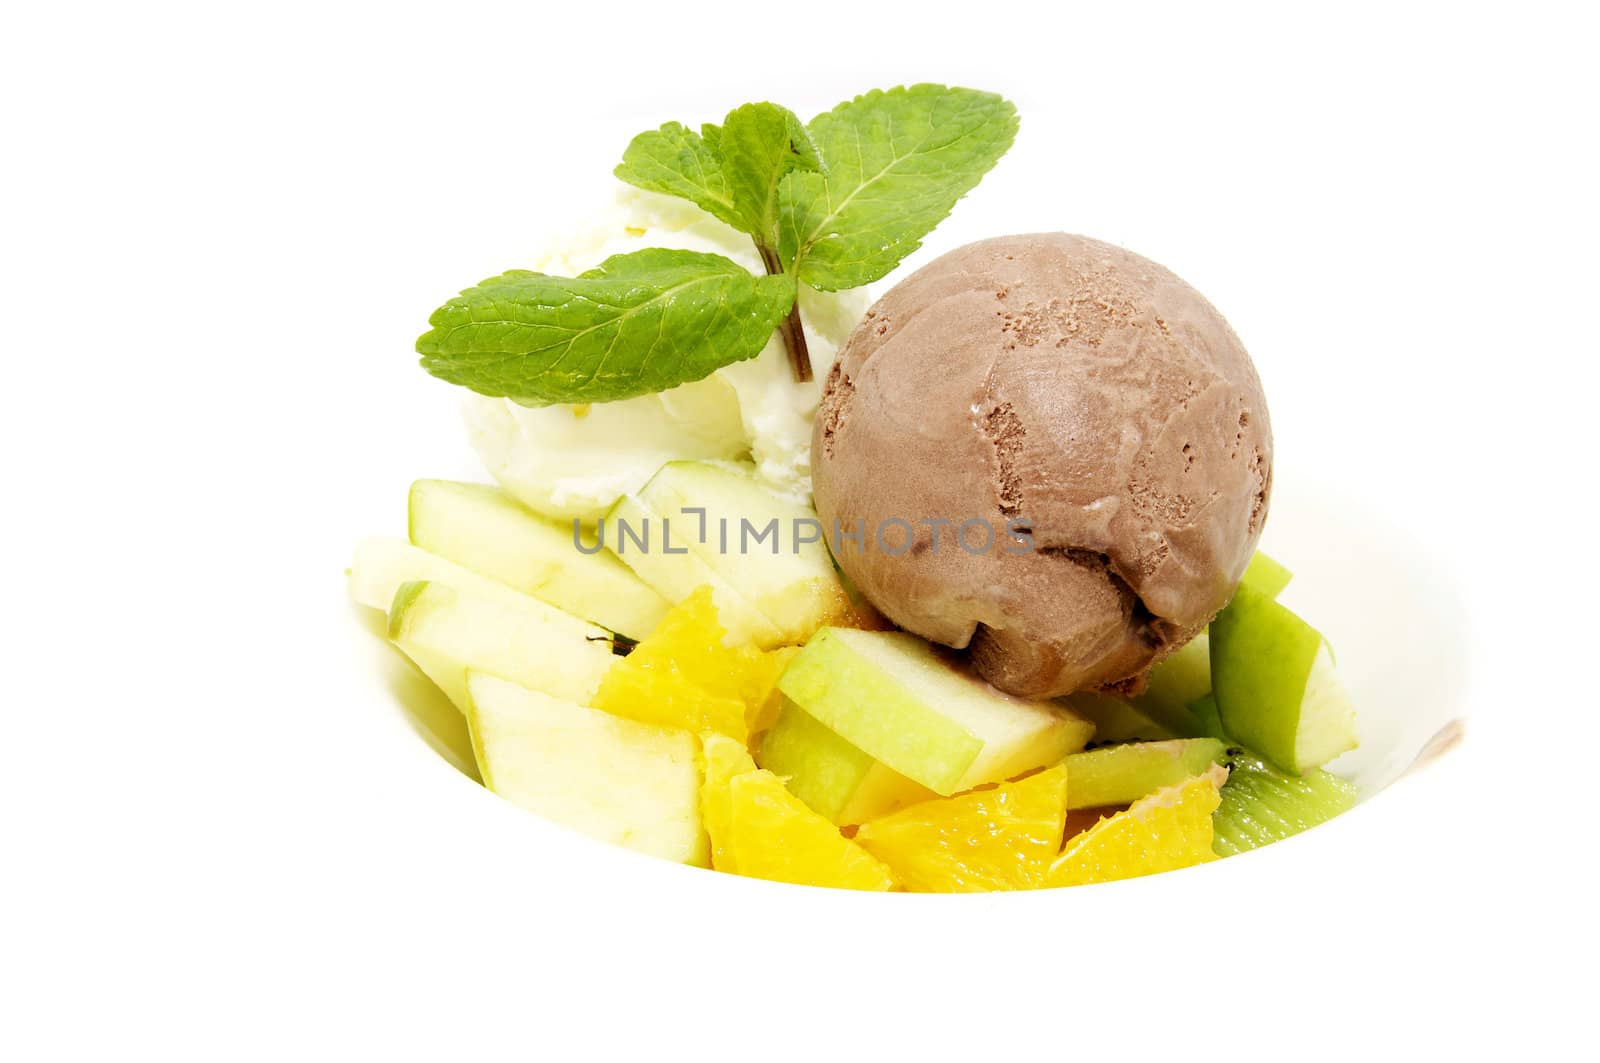 a plate of ice cream and fruit on a white background